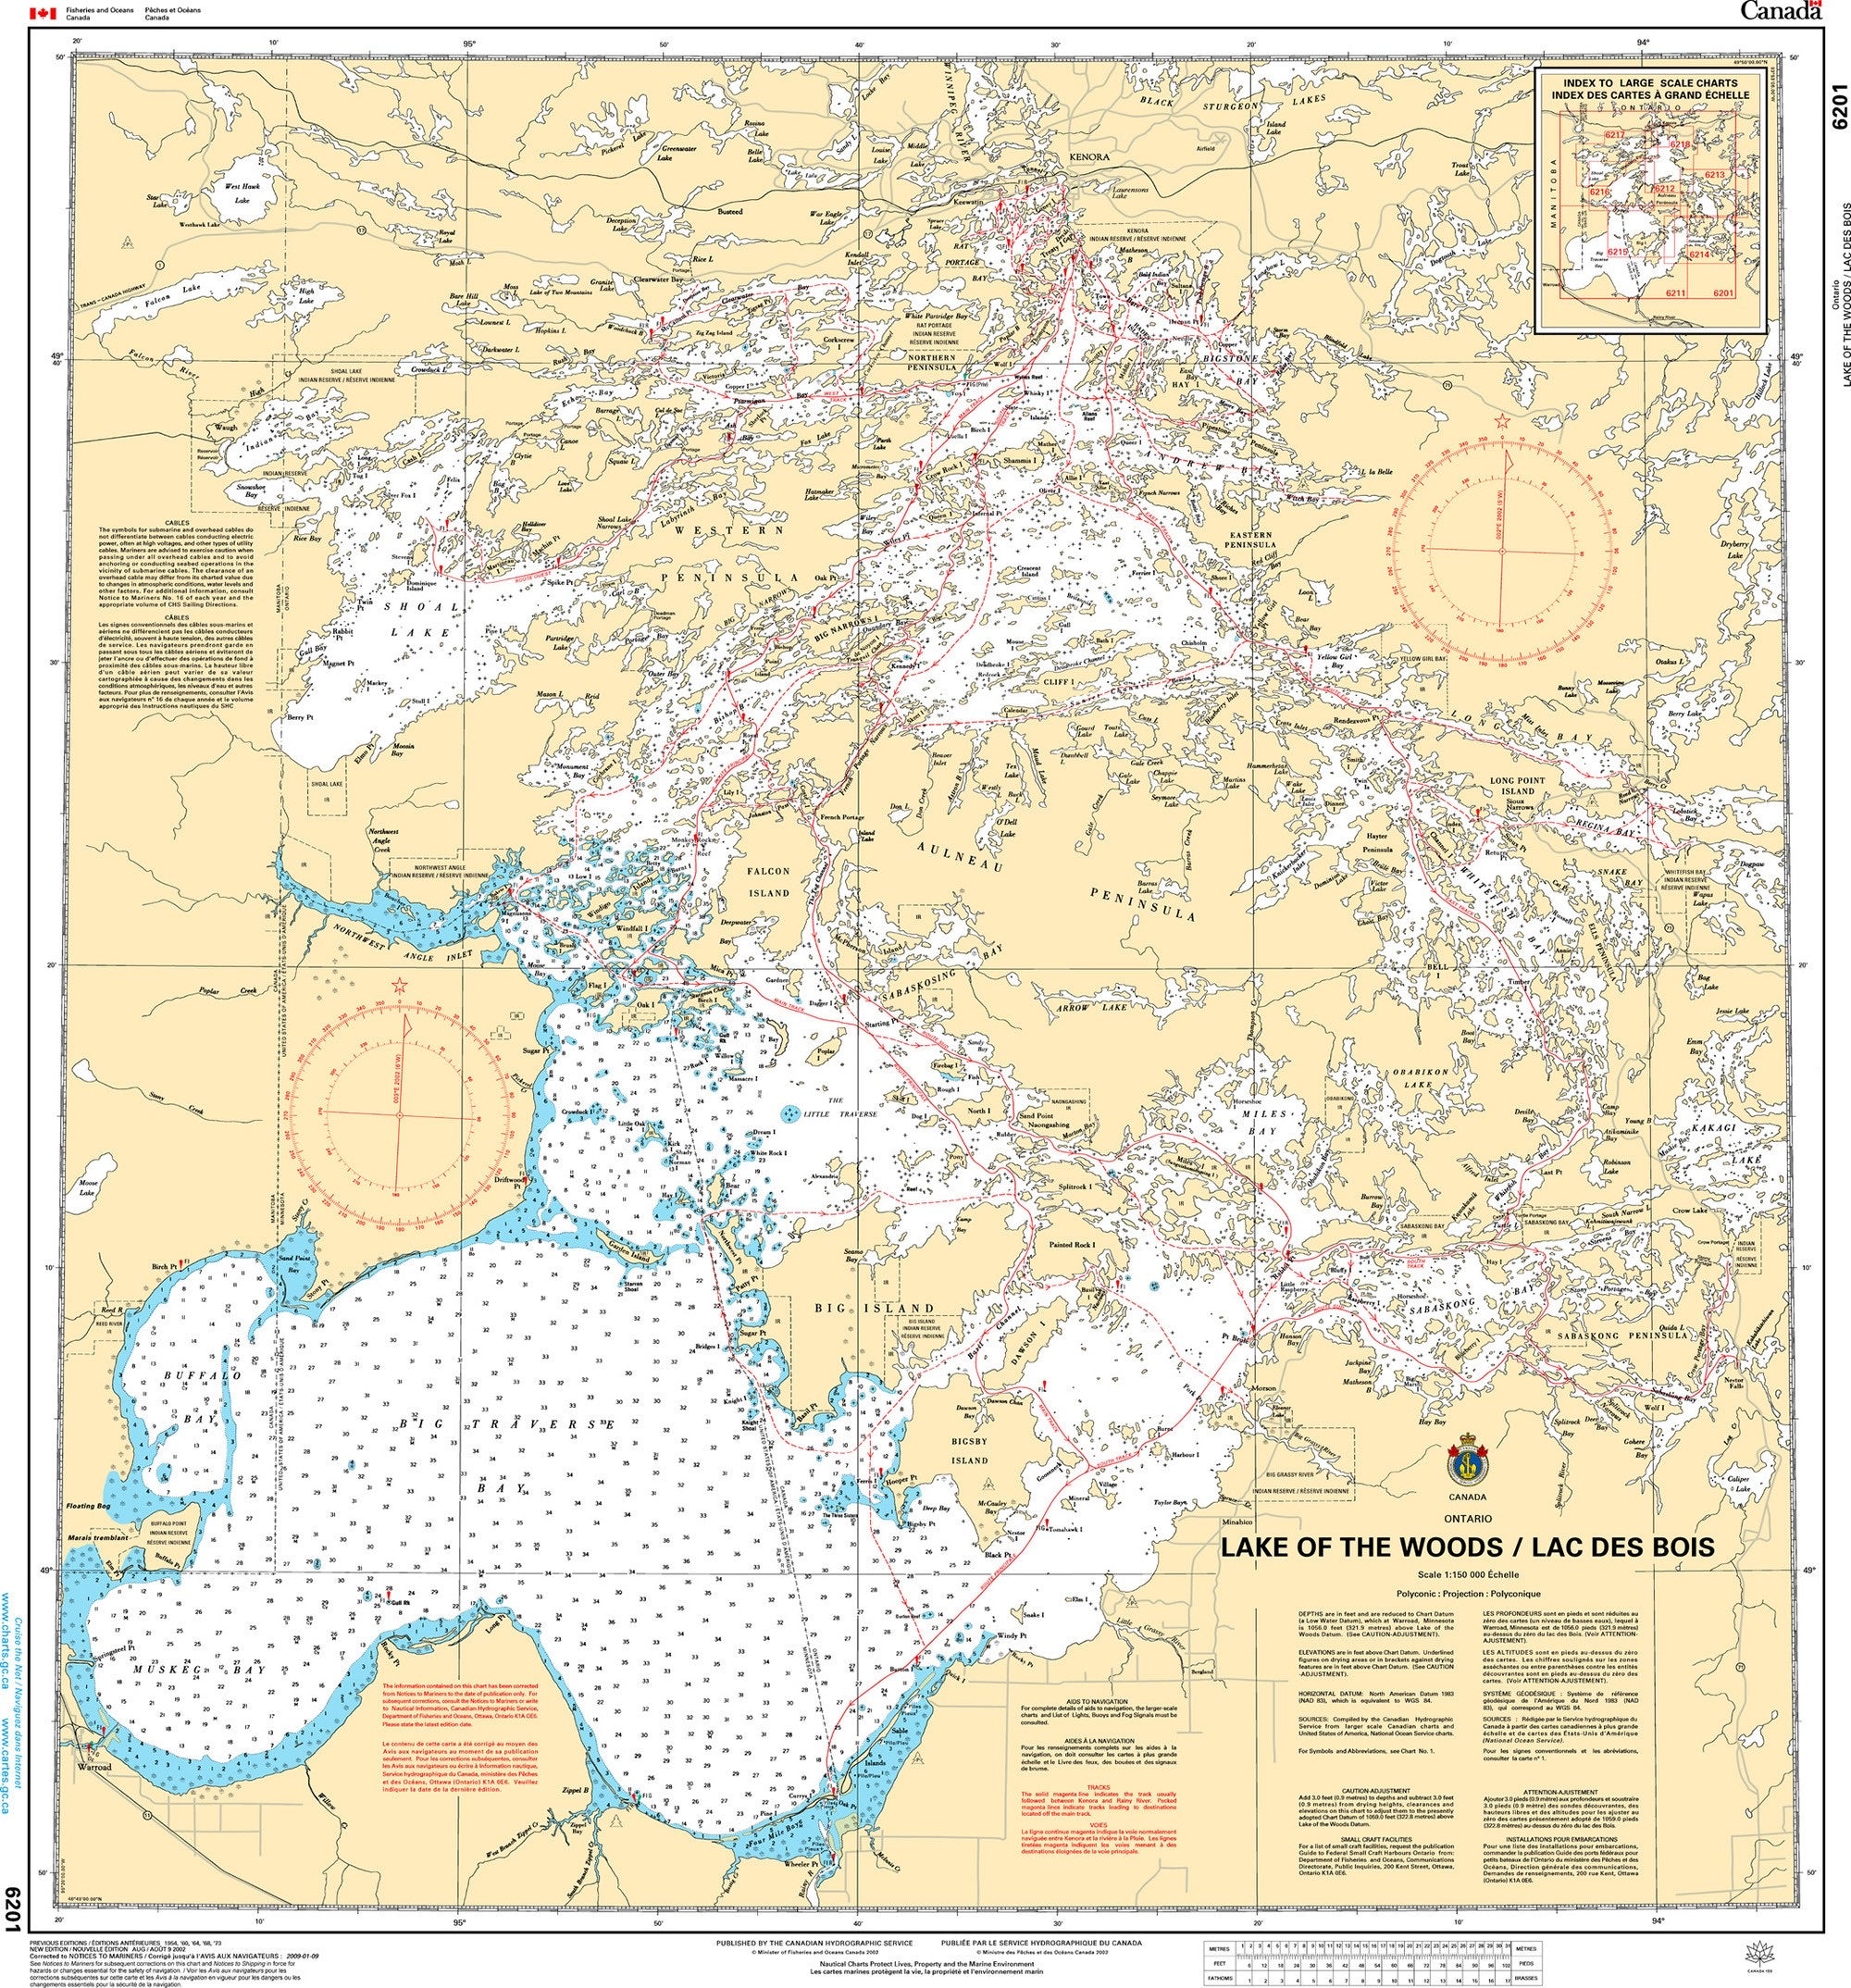 Fisheries and Oceans Canada Hydrographic Maps